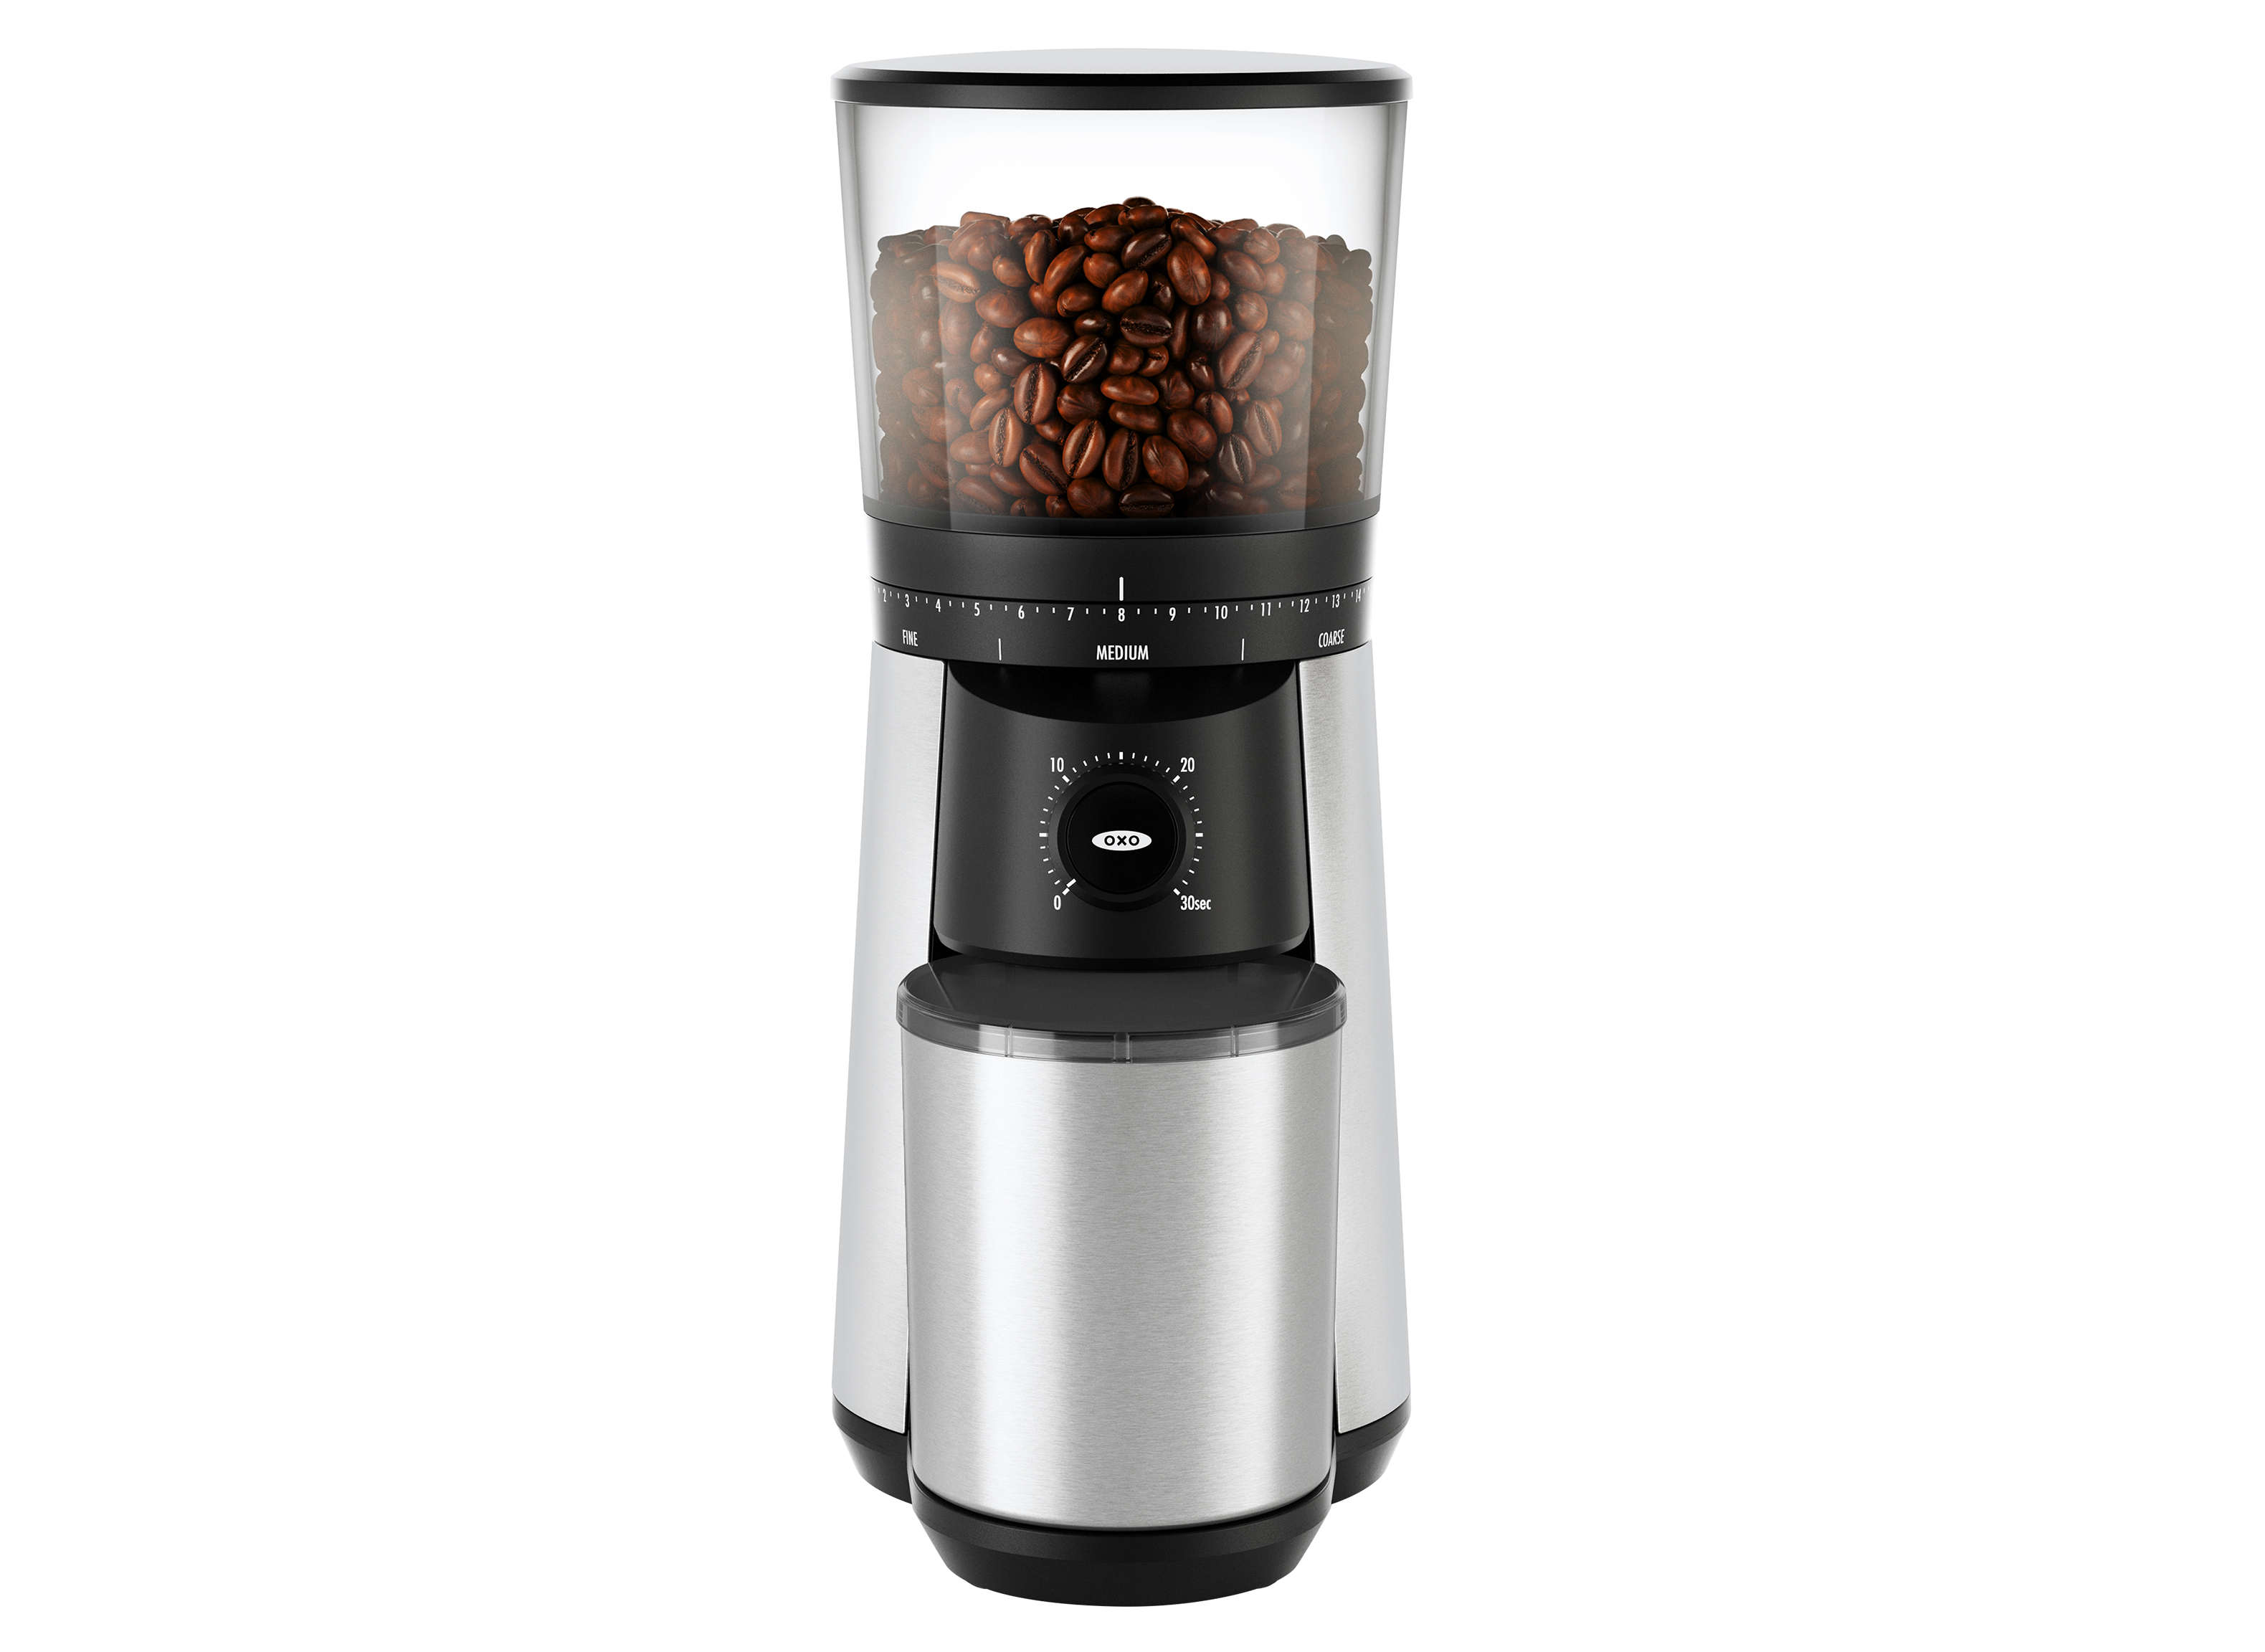 https://crdms.images.consumerreports.org/prod/products/cr/models/398874-coffee-grinders-oxo-brew-conical-burr-coffee-grinder-10006154.png